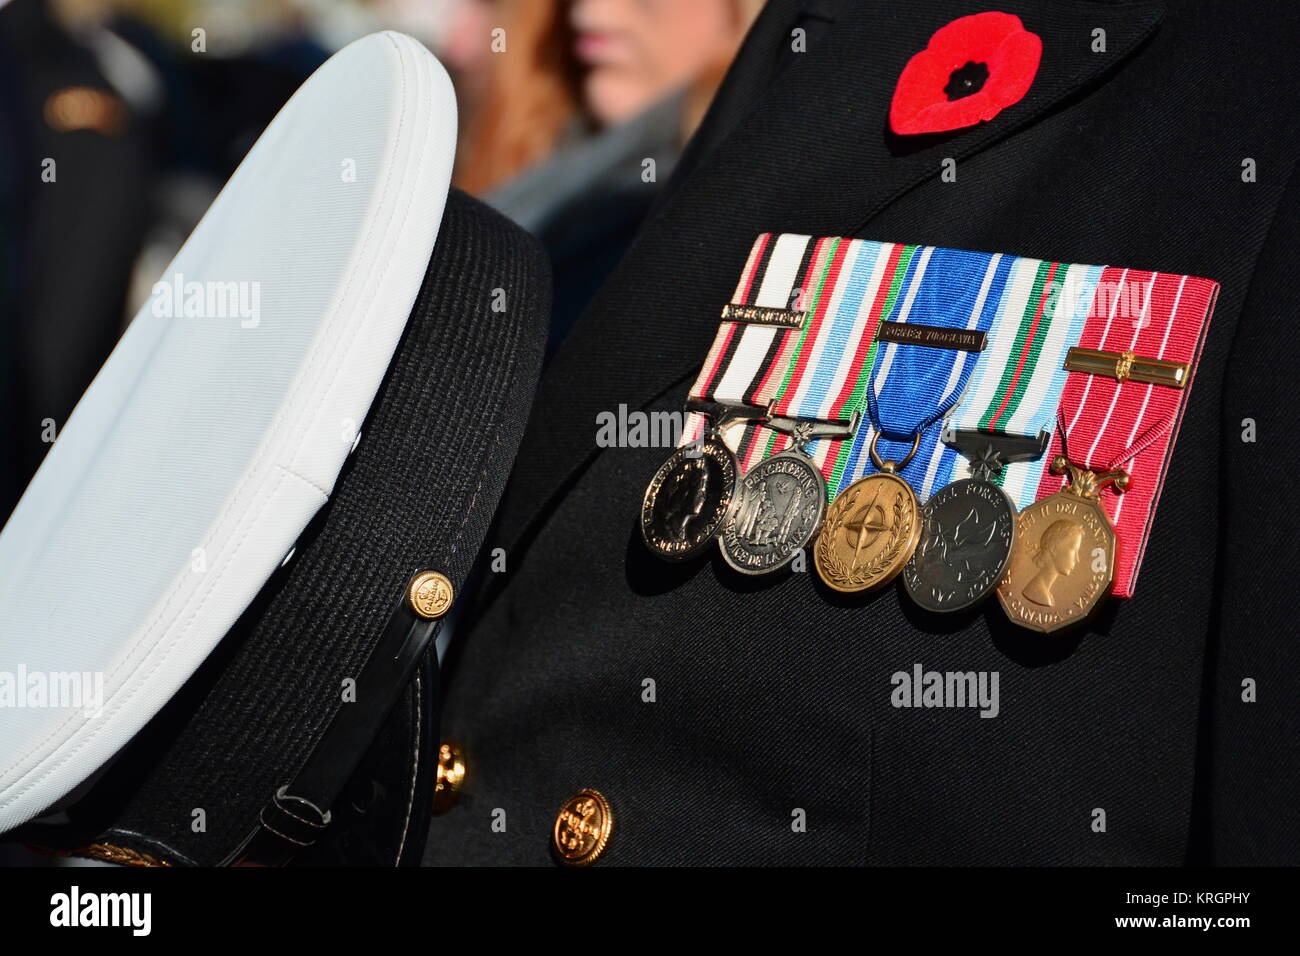 A war veterans medals on display on his coat on Remembrance Day. Stock Photo